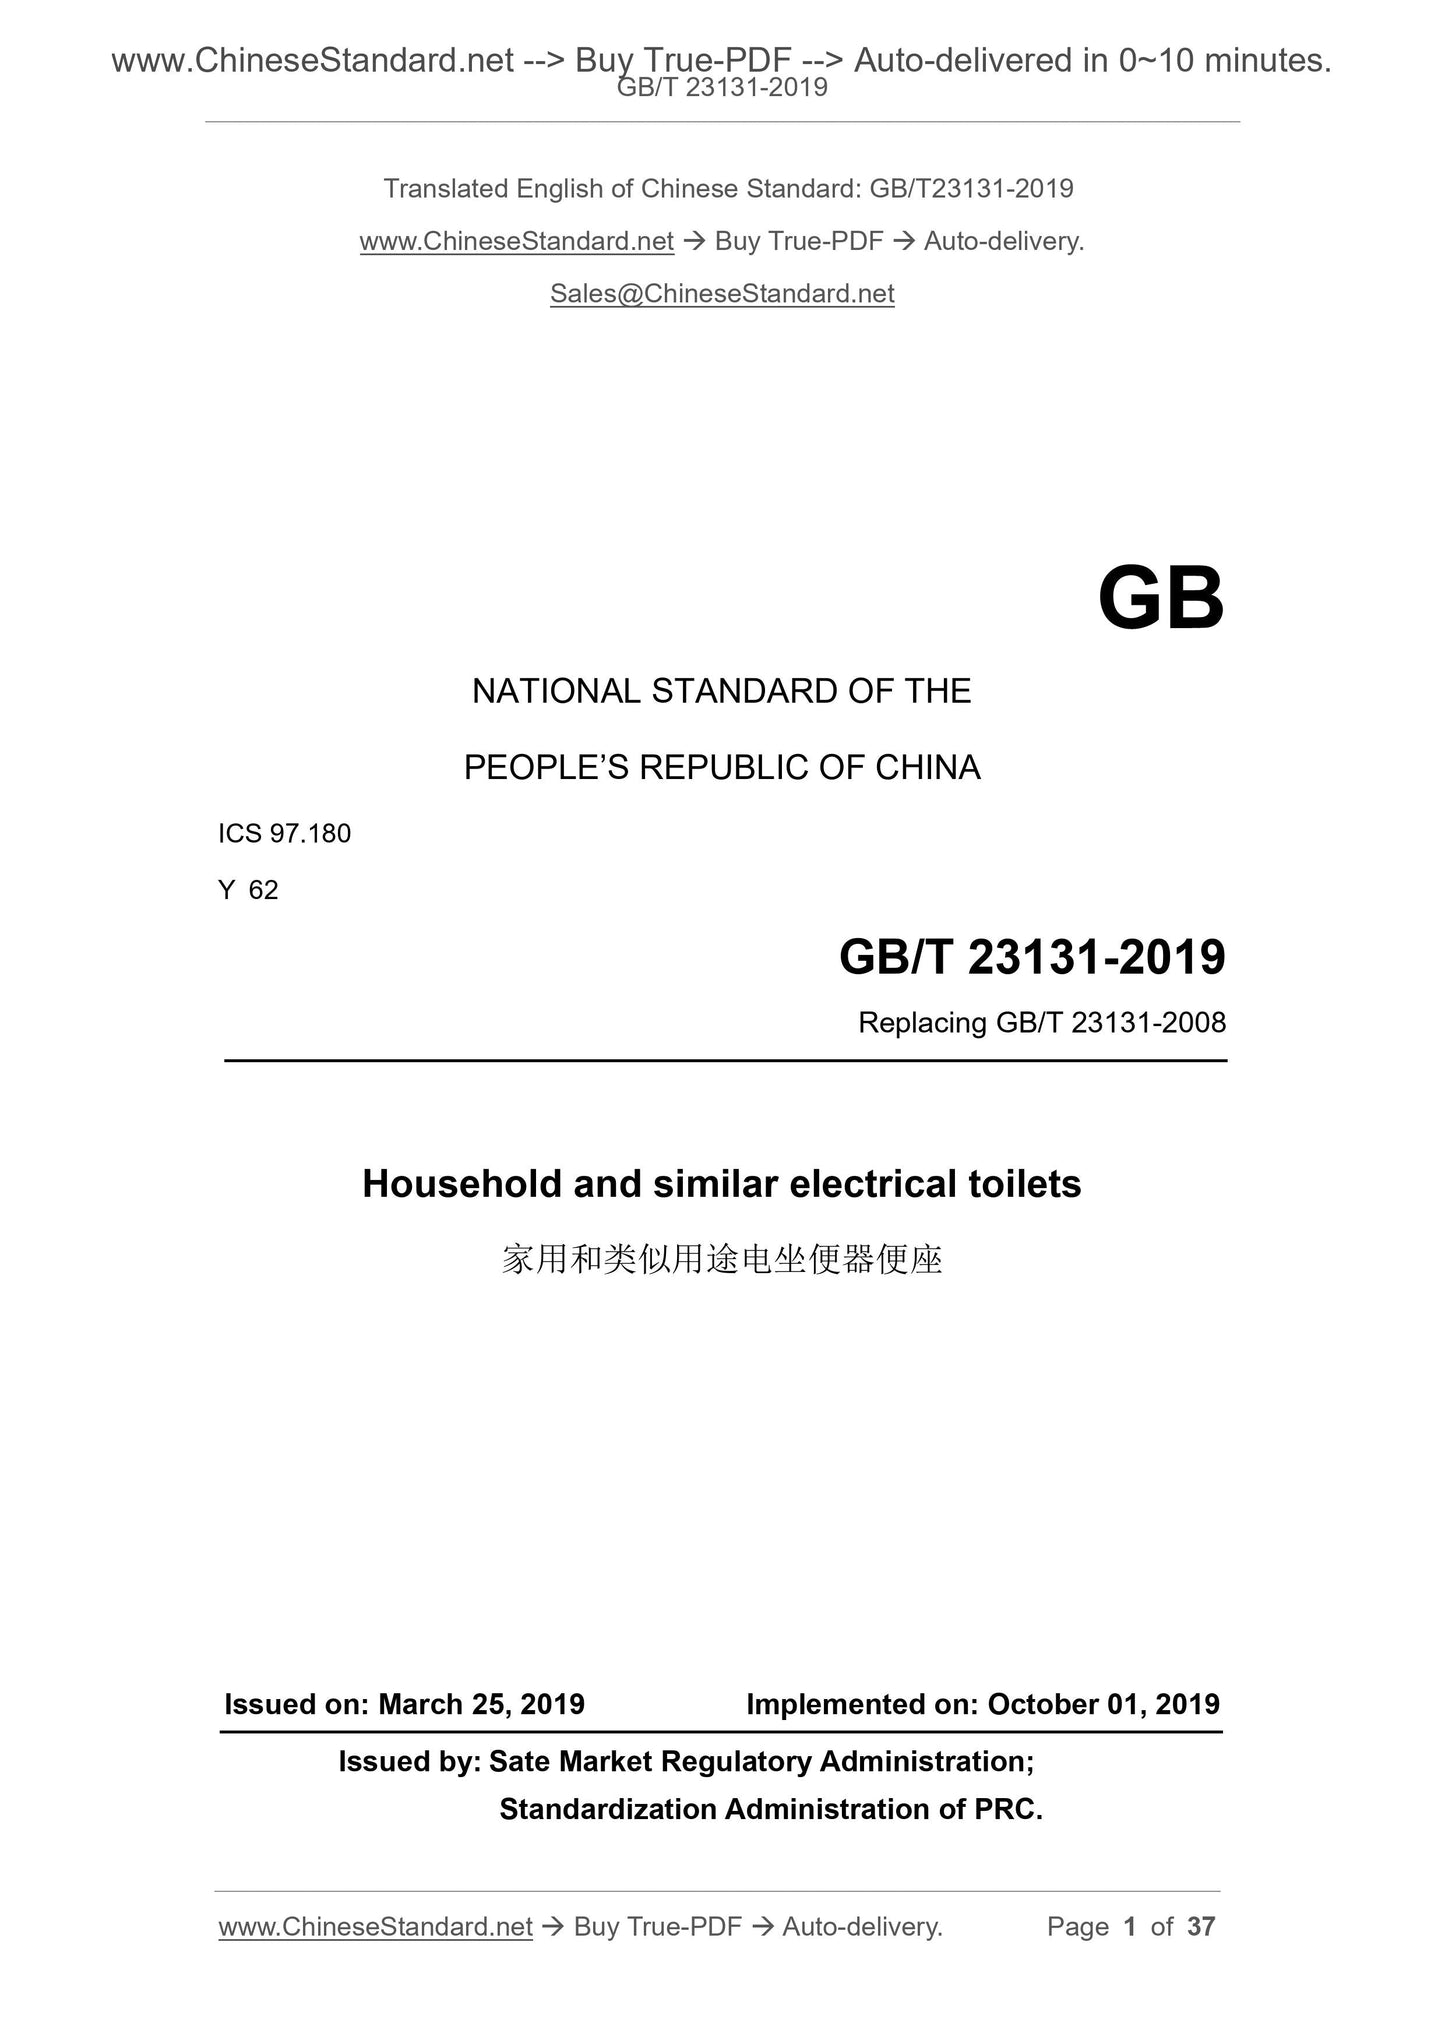 GB/T 23131-2019 Page 1